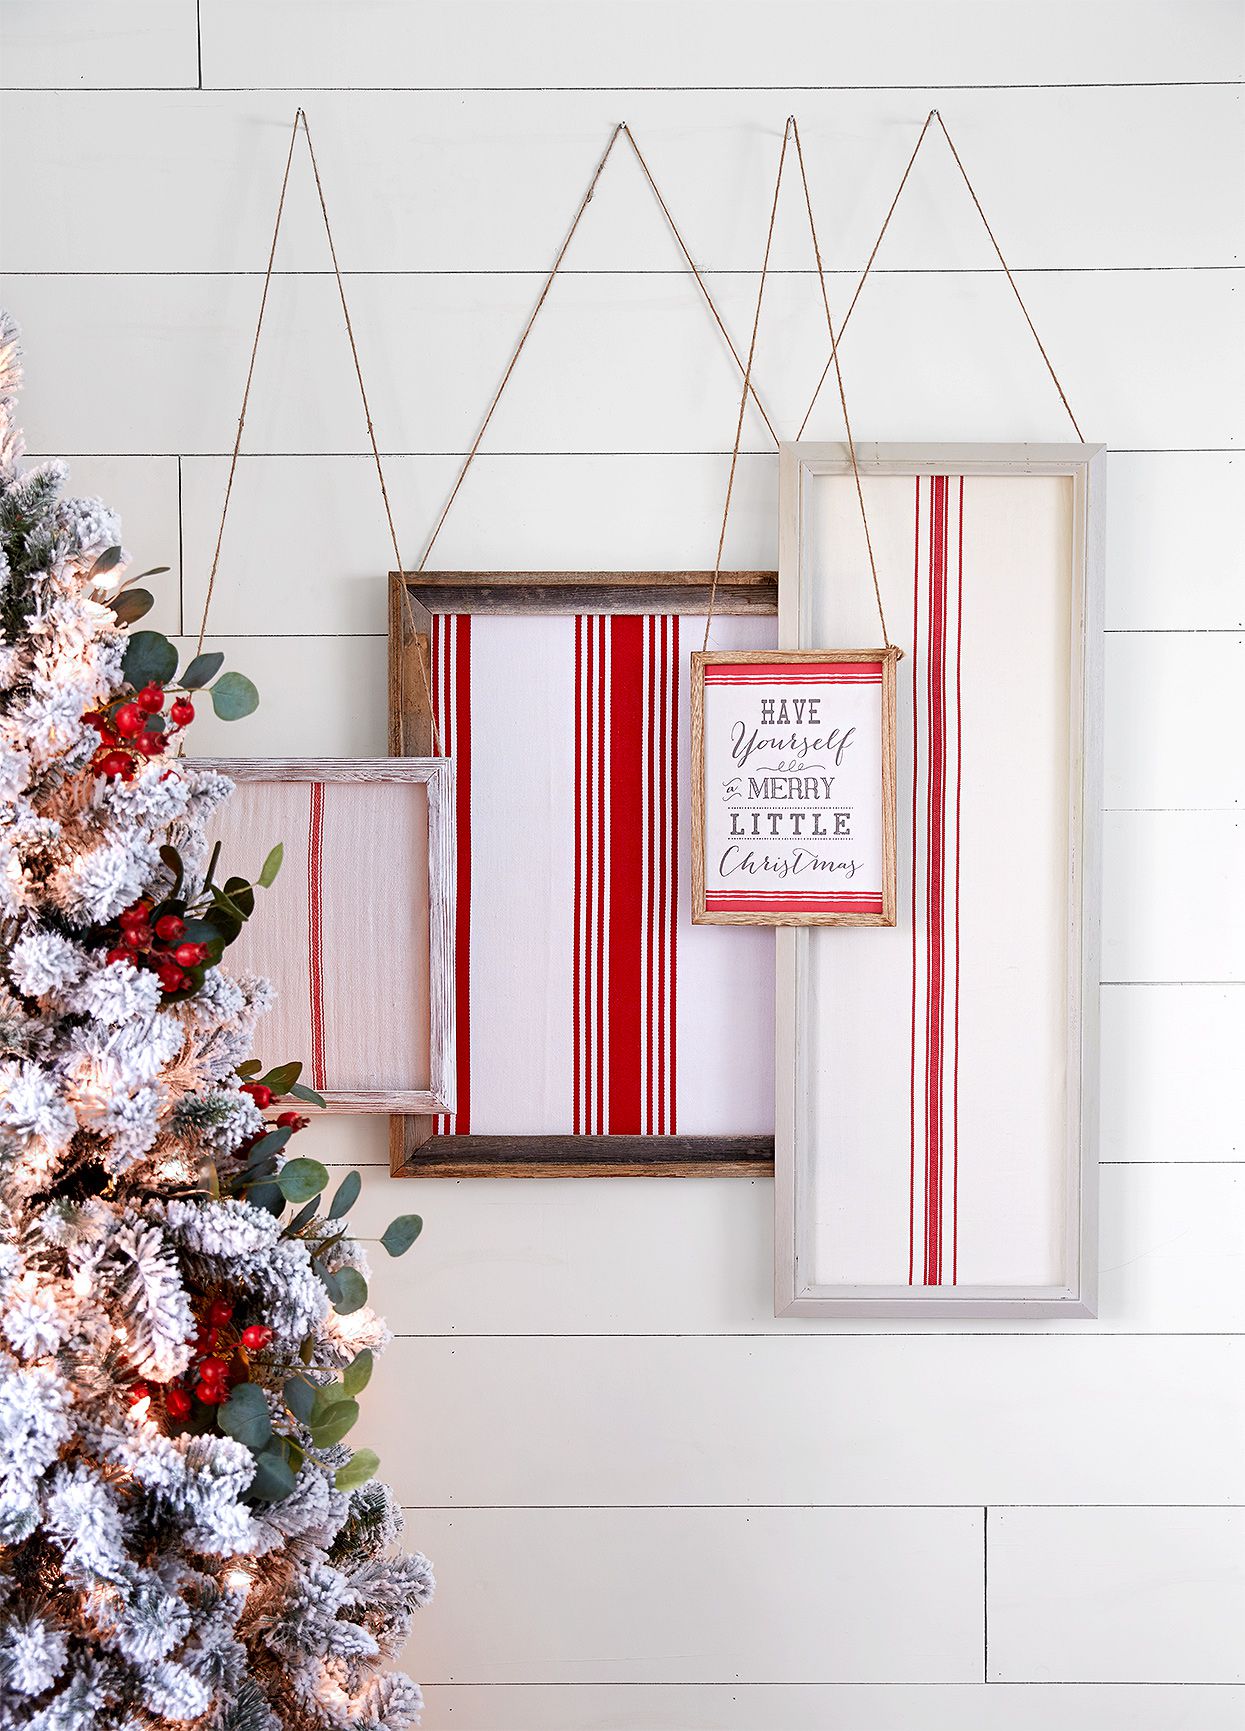 Christmas Wall Decor Ideas With Awesomeness And Originality